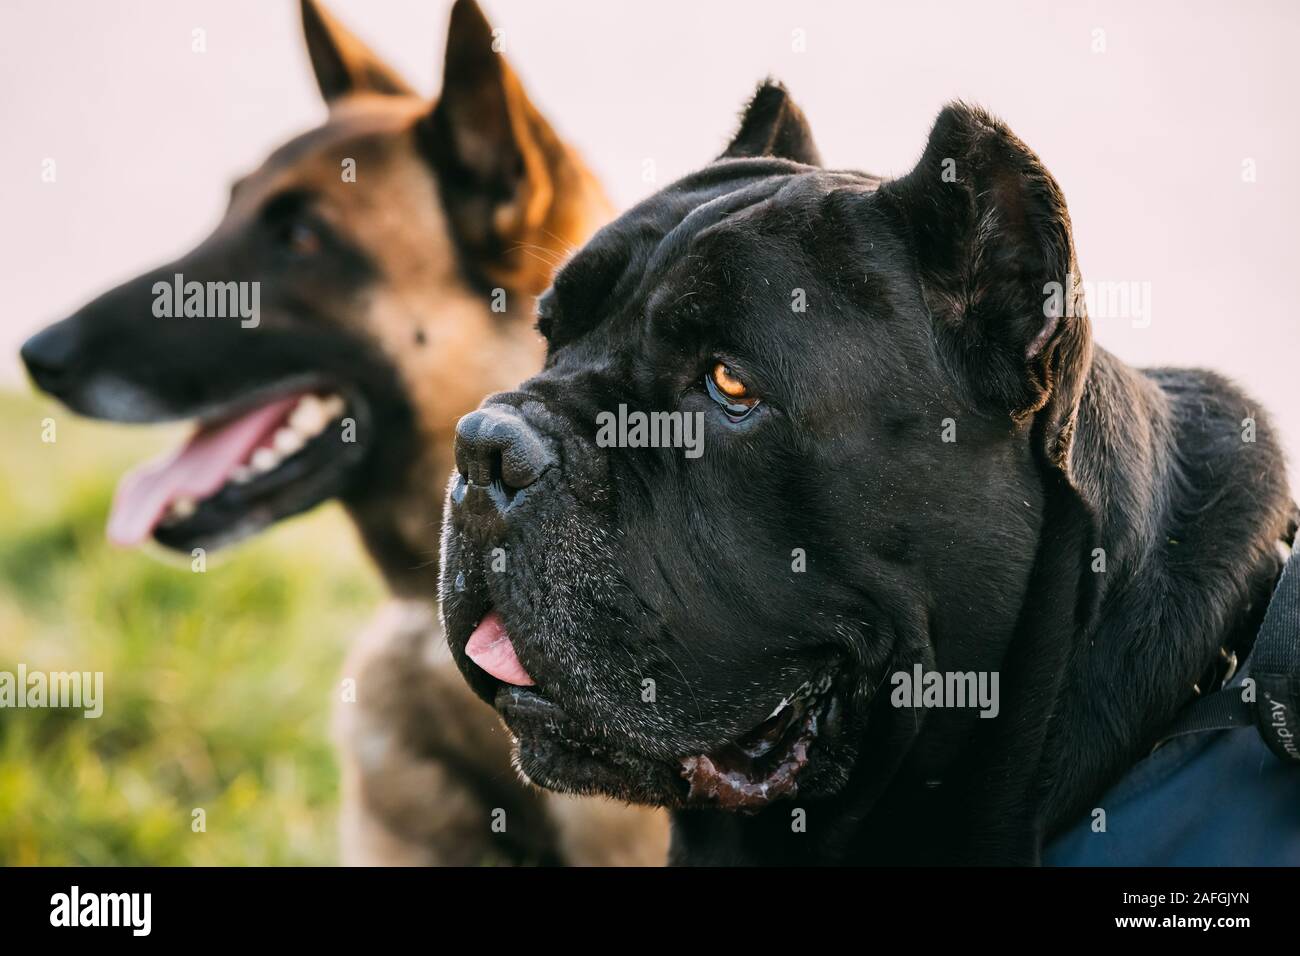 Red Malinois Dog And Black Cane Corso Dog Sitting Together In Grass. Close Up Portrait. Stock Photo